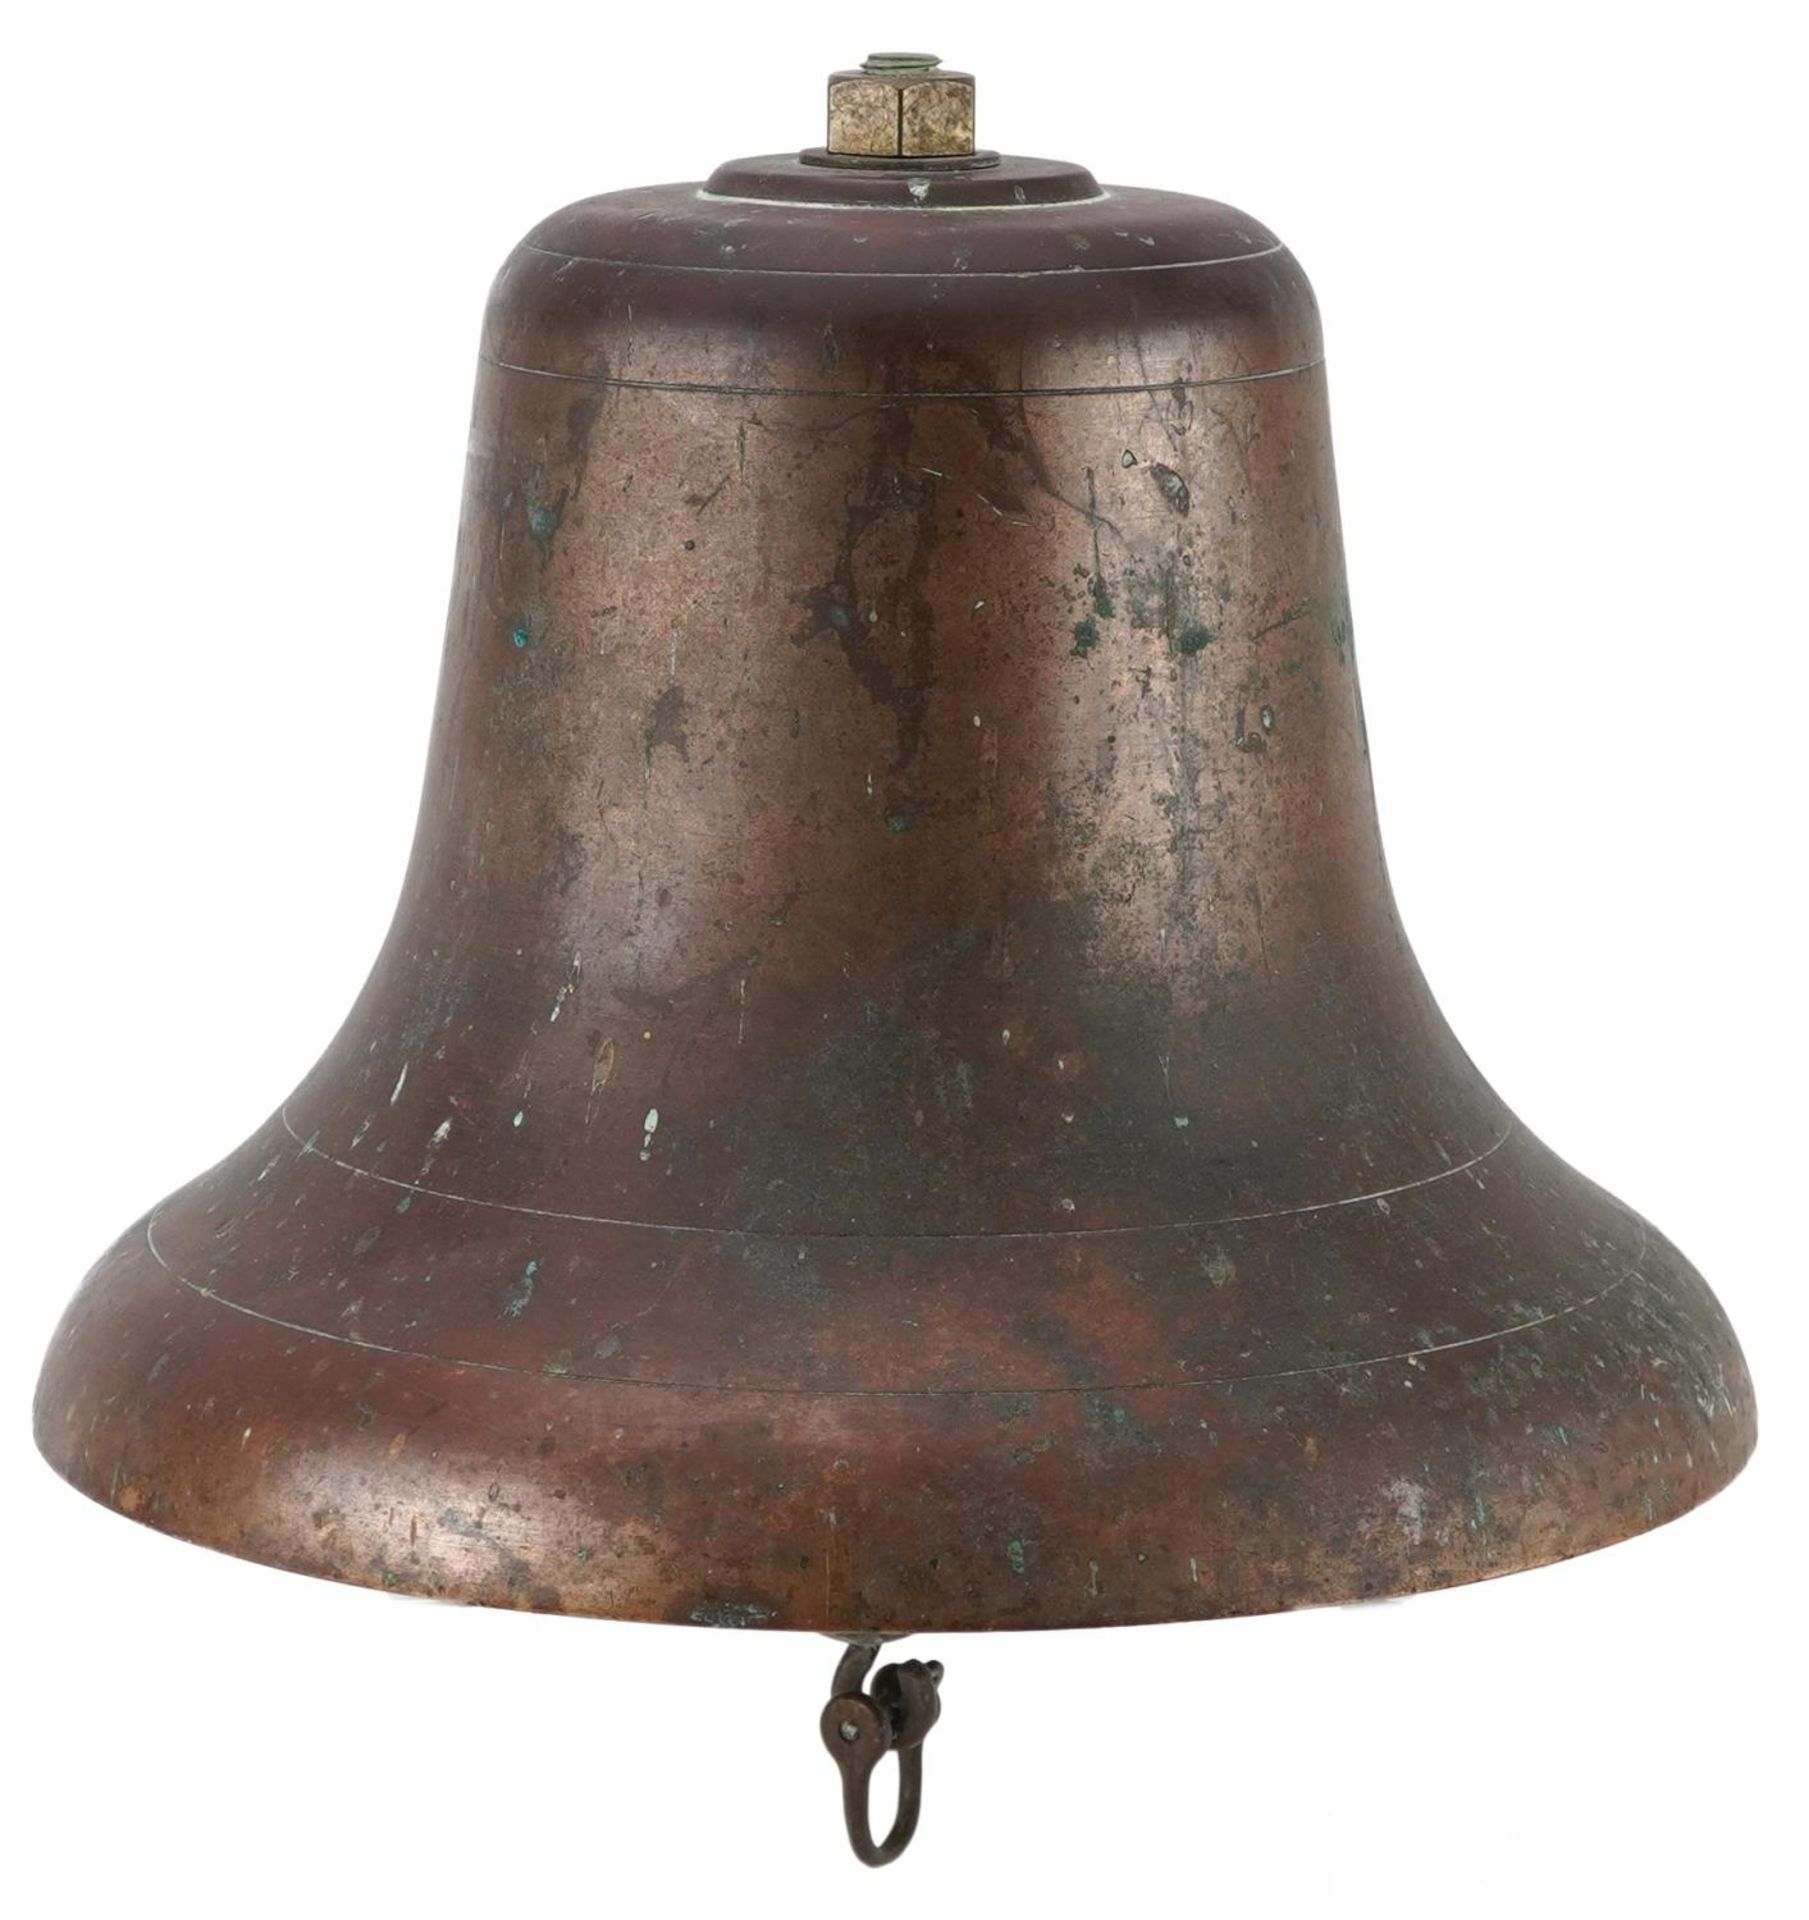 Antique patinated bronze ship's bell, 20.5cm high - Image 2 of 3